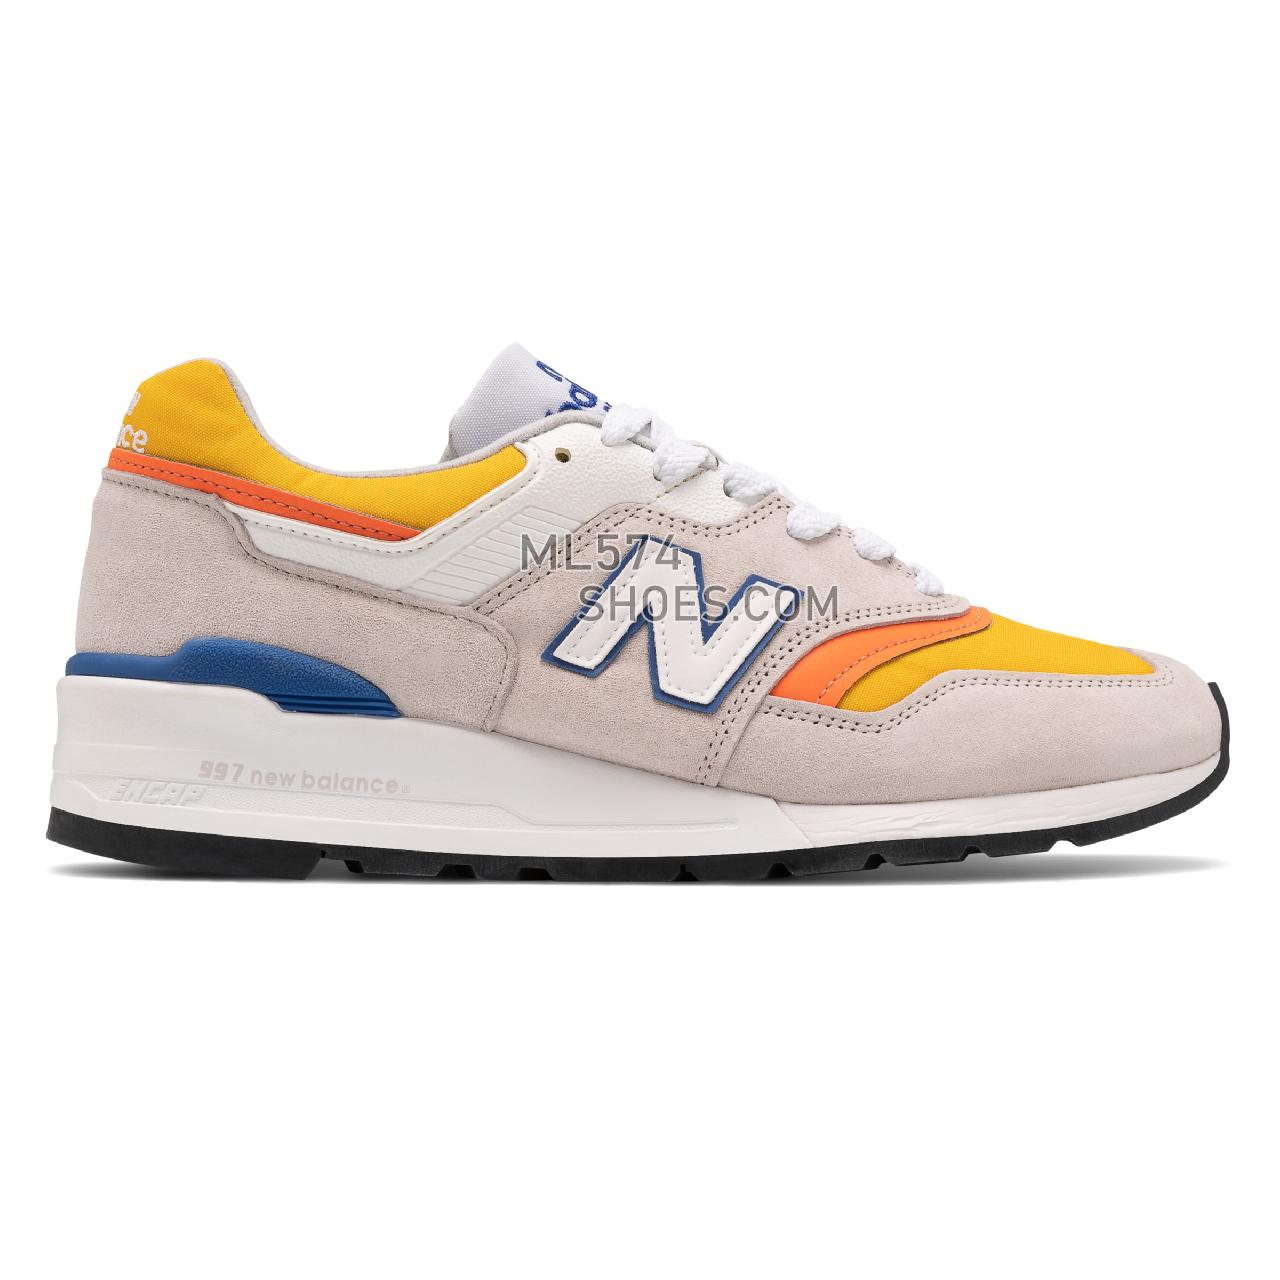 New Balance Made in USA 997 - Men's Made in USA And UK Sneakers - Grey with Orange - M997PT